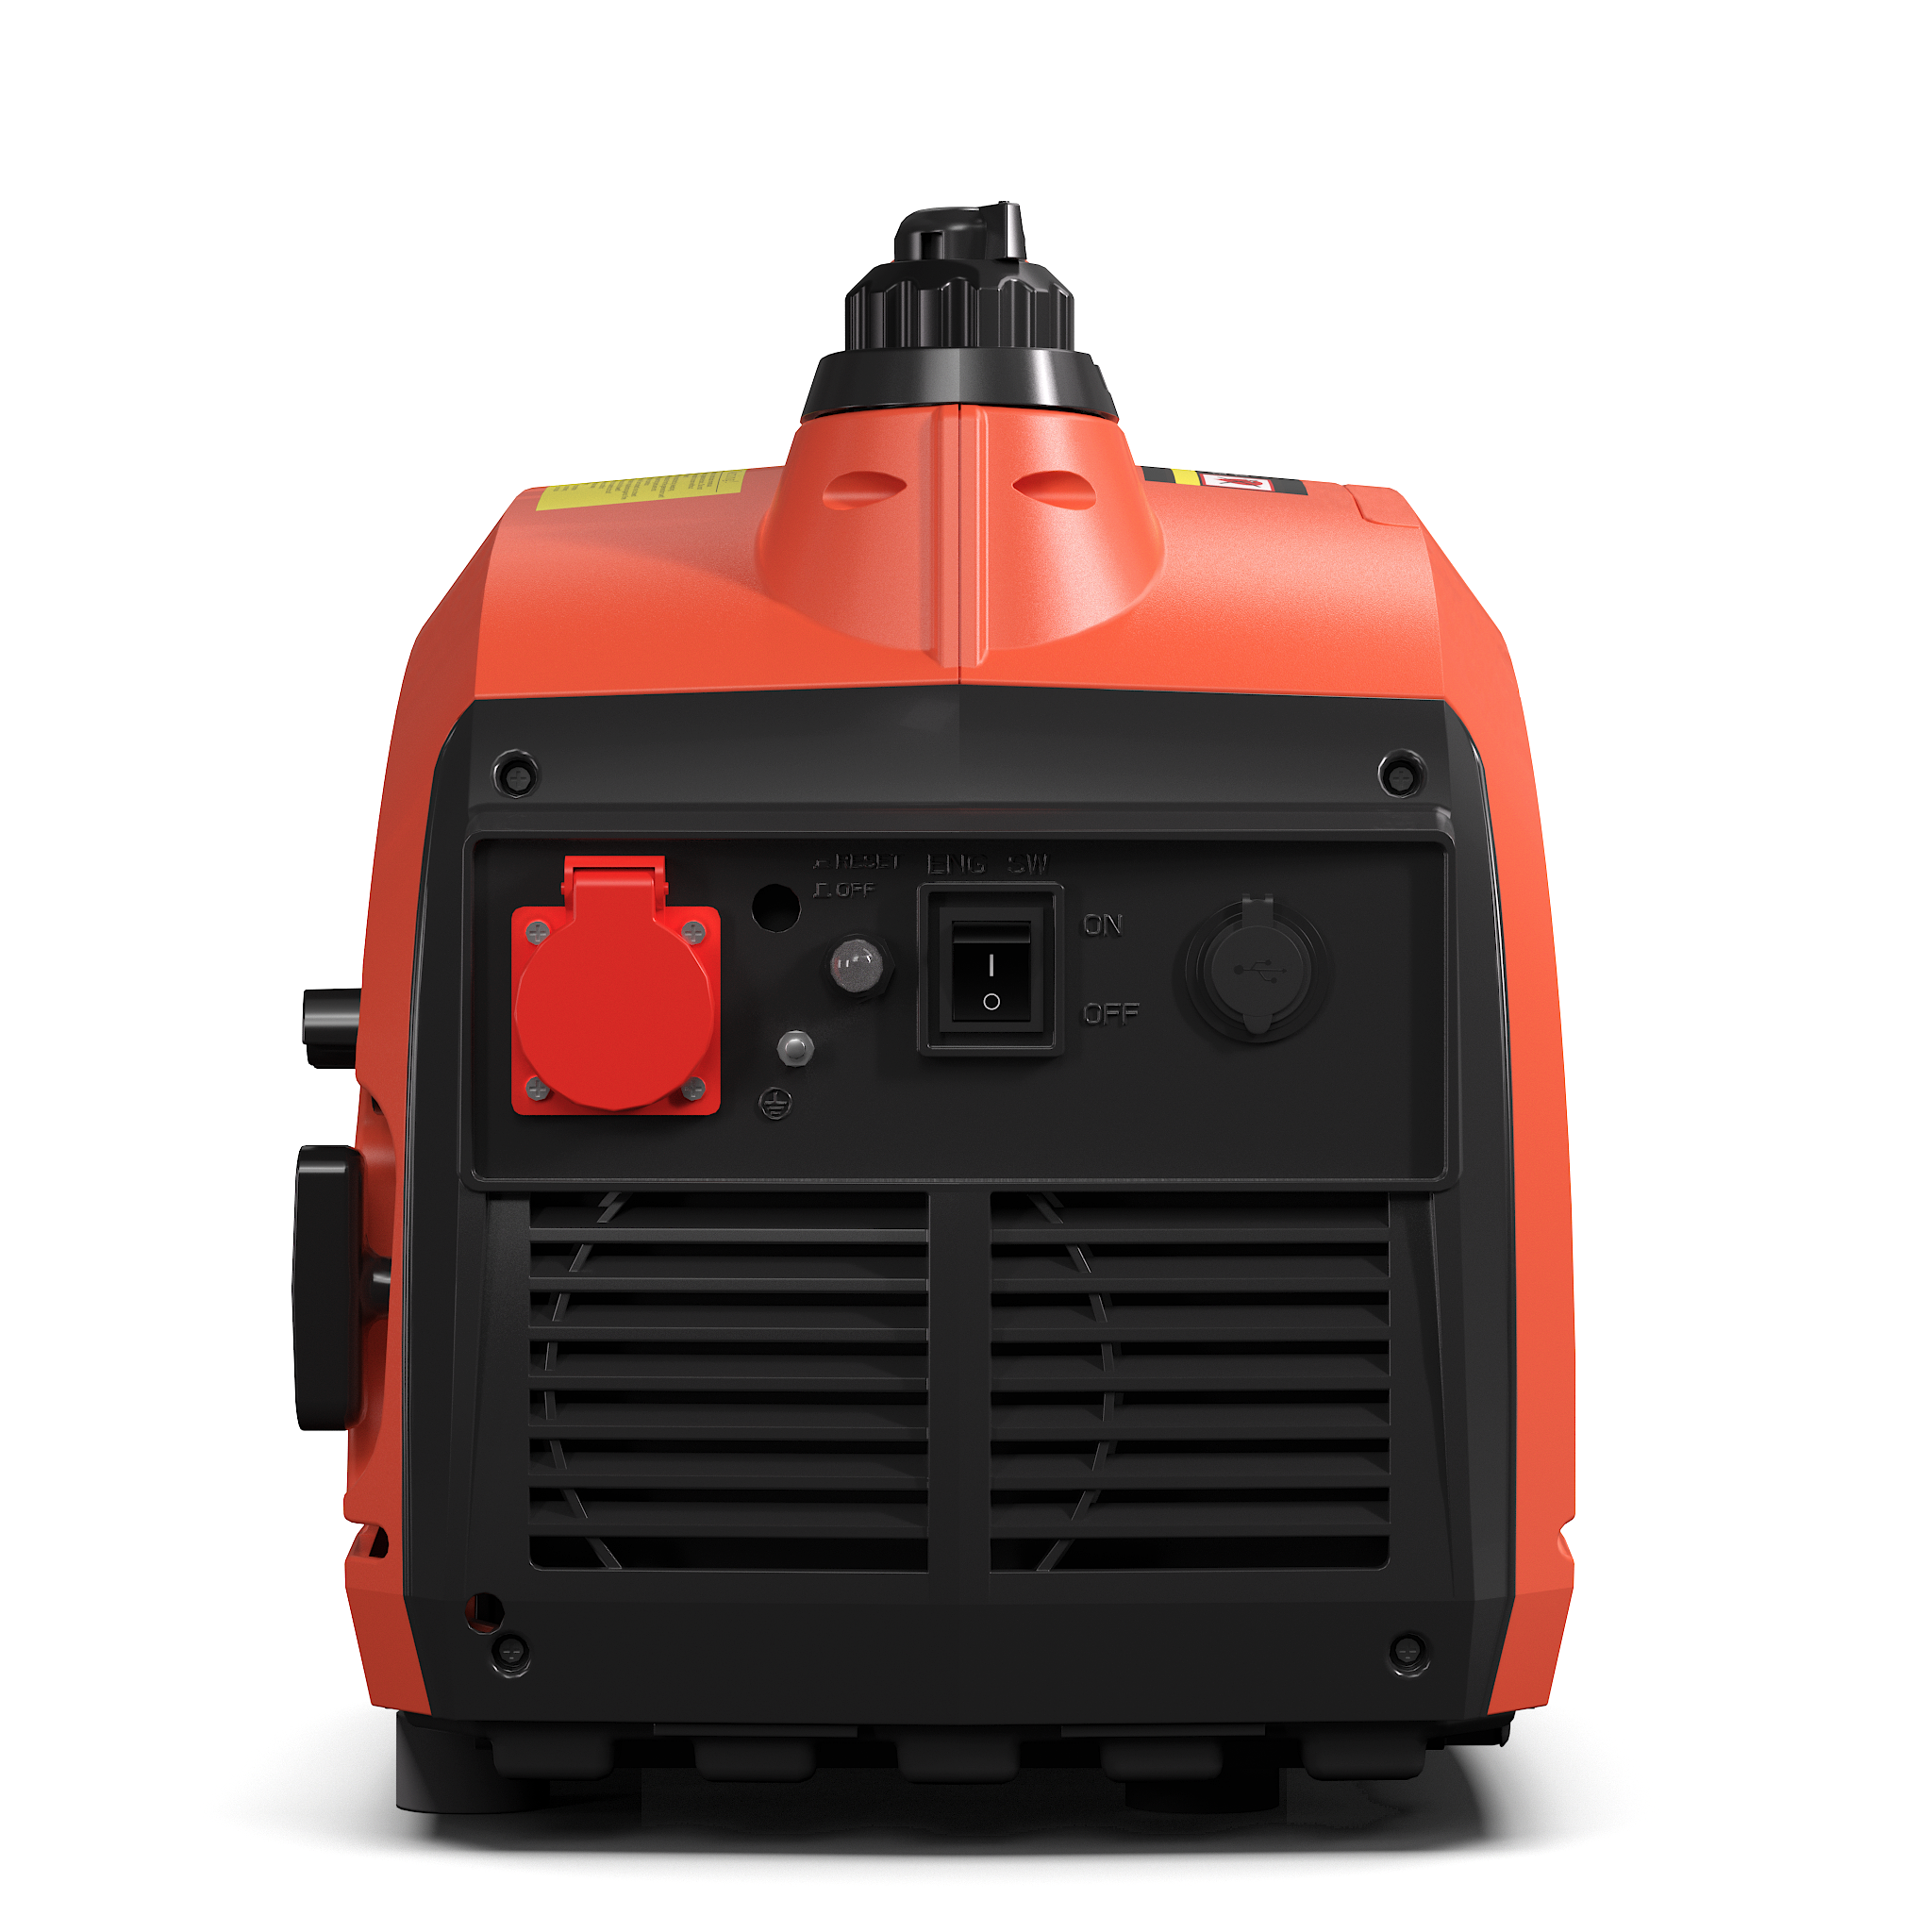 EYG1000G Portable Gasoline Generator 750W, Quiet Generatorl for Camping & Home Backup Power